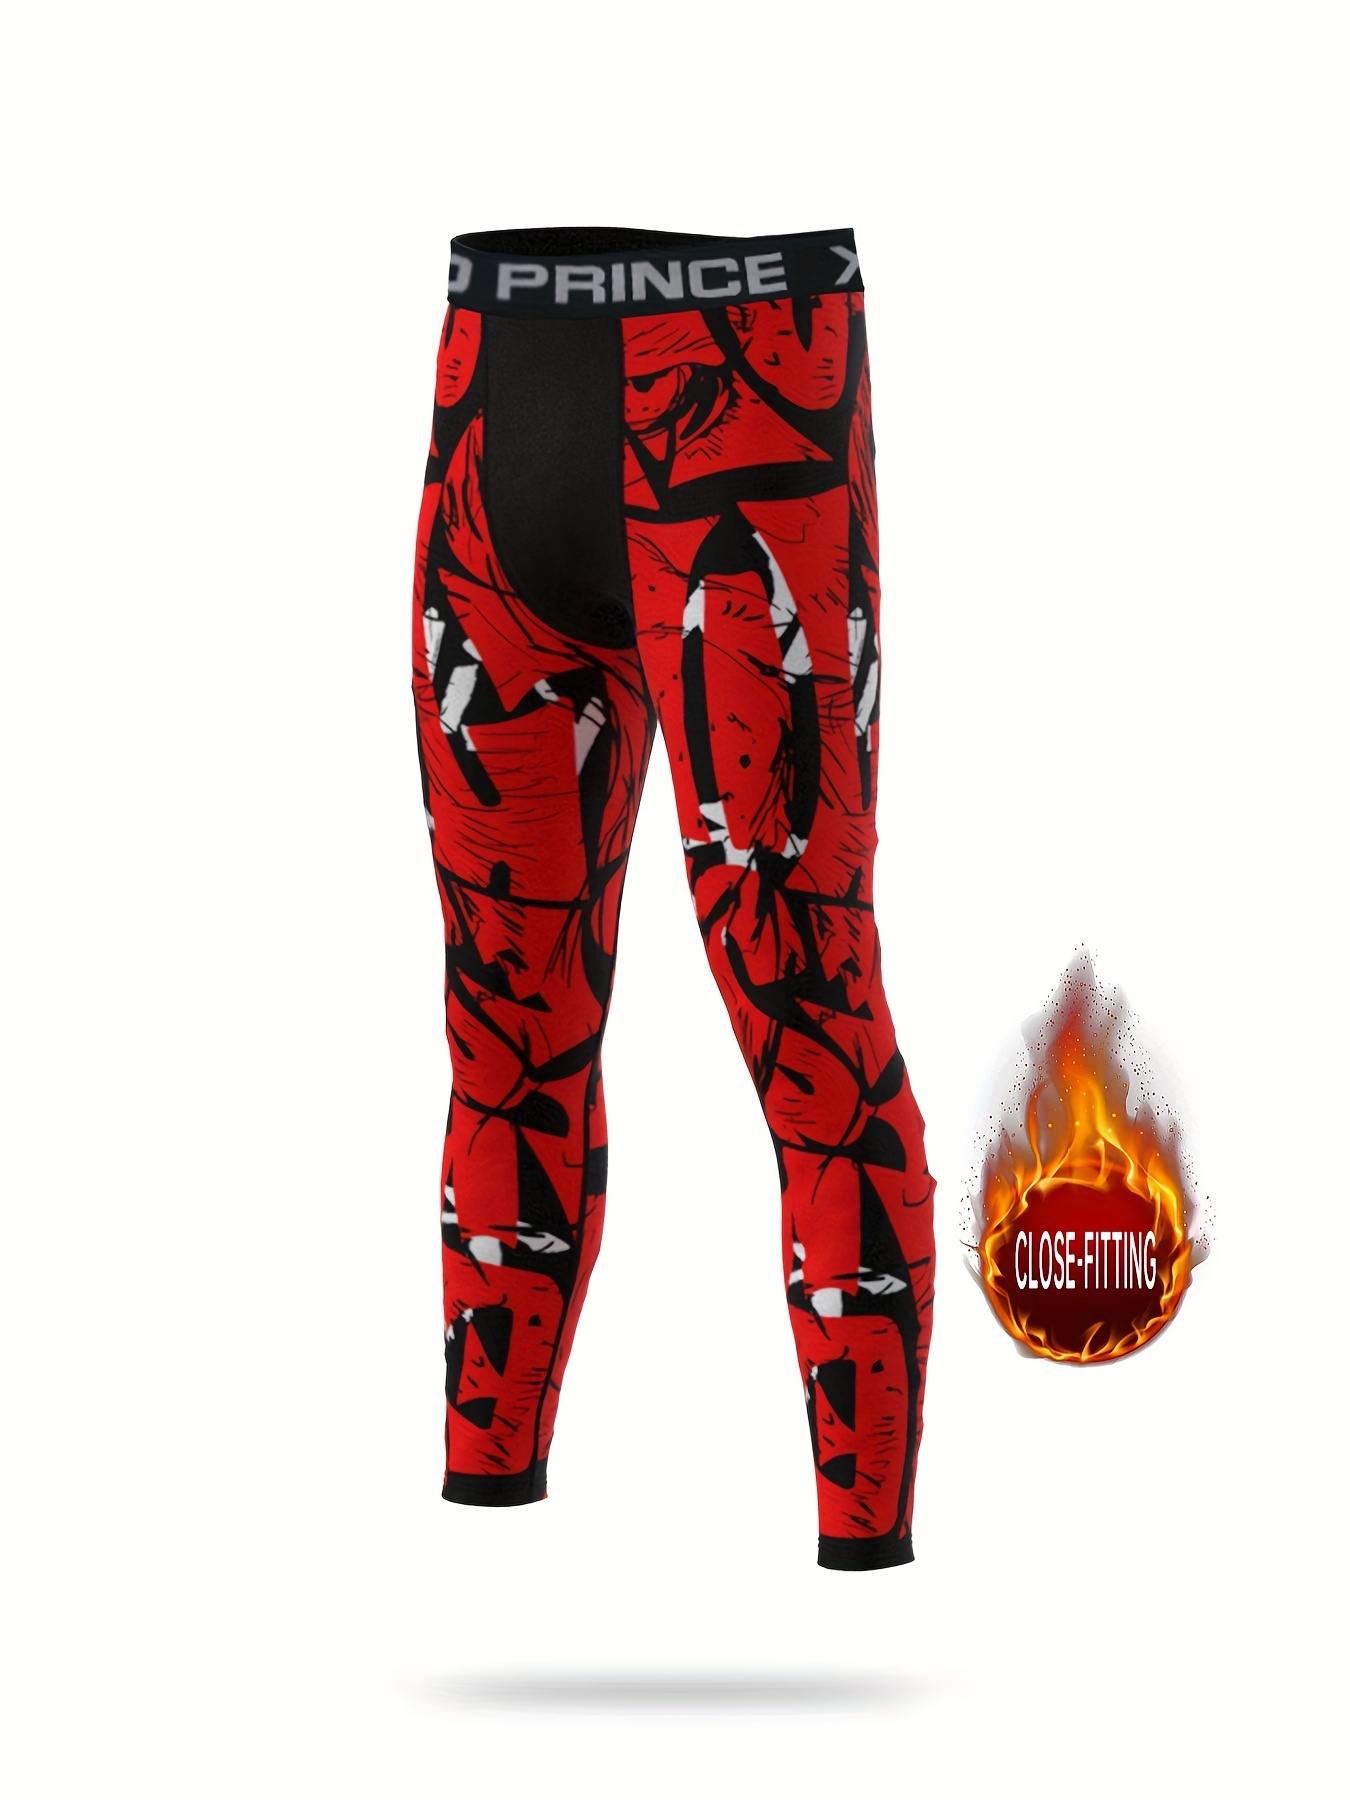 Quick-Drying Men's Compression Pants for Running, Training, and Fitness -  Moisture-Wicking and Breathable Leggings with Graffiti Design